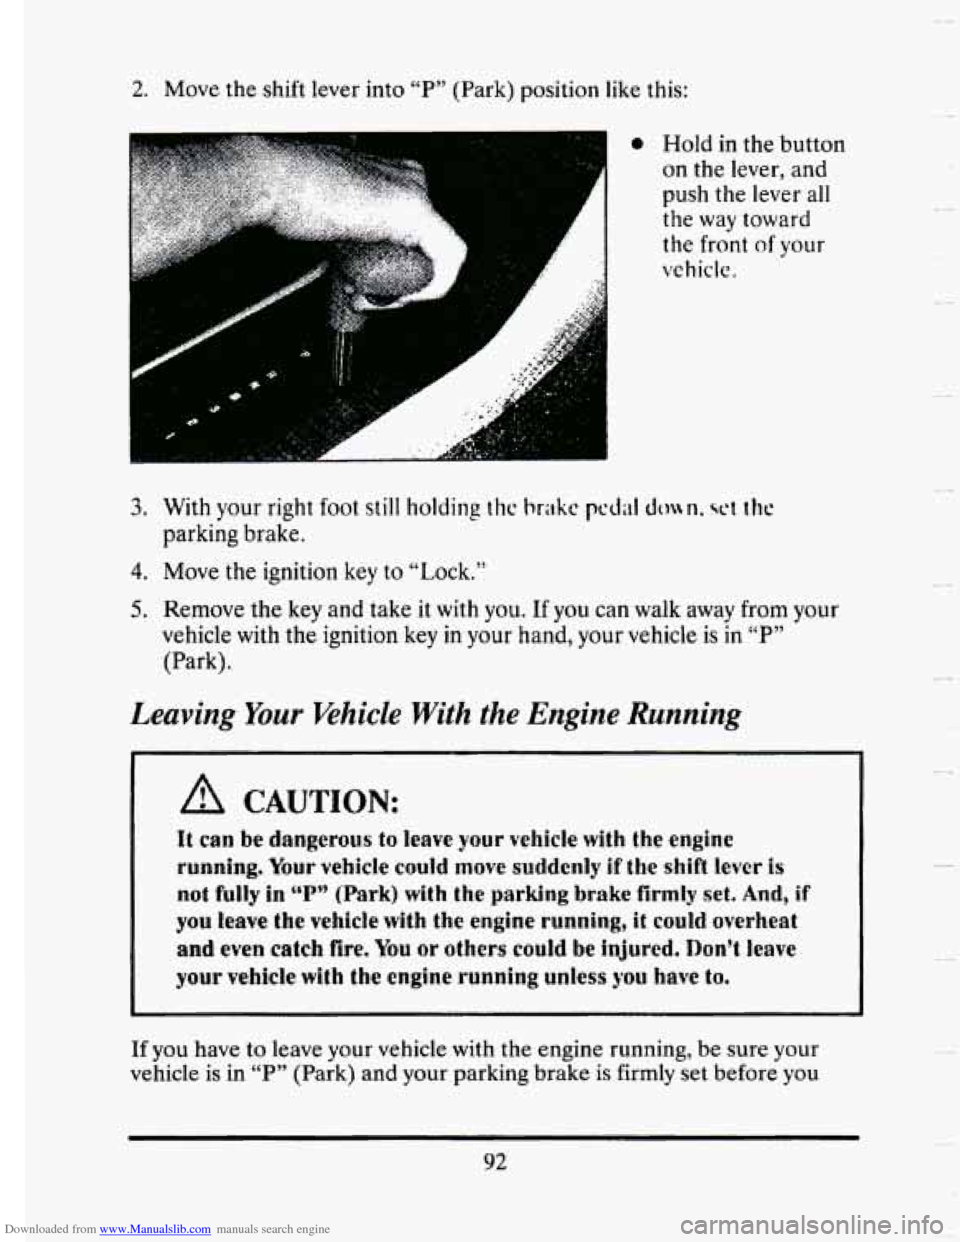 CADILLAC SEVILLE 1993 4.G Owners Manual Downloaded from www.Manualslib.com manuals search engine 2. Move the shift  lever  into “P” (Park)  position  like this: 
0 Hold  in the  button 
on  the  lever,  and 
push 
the lever all 
the  wa